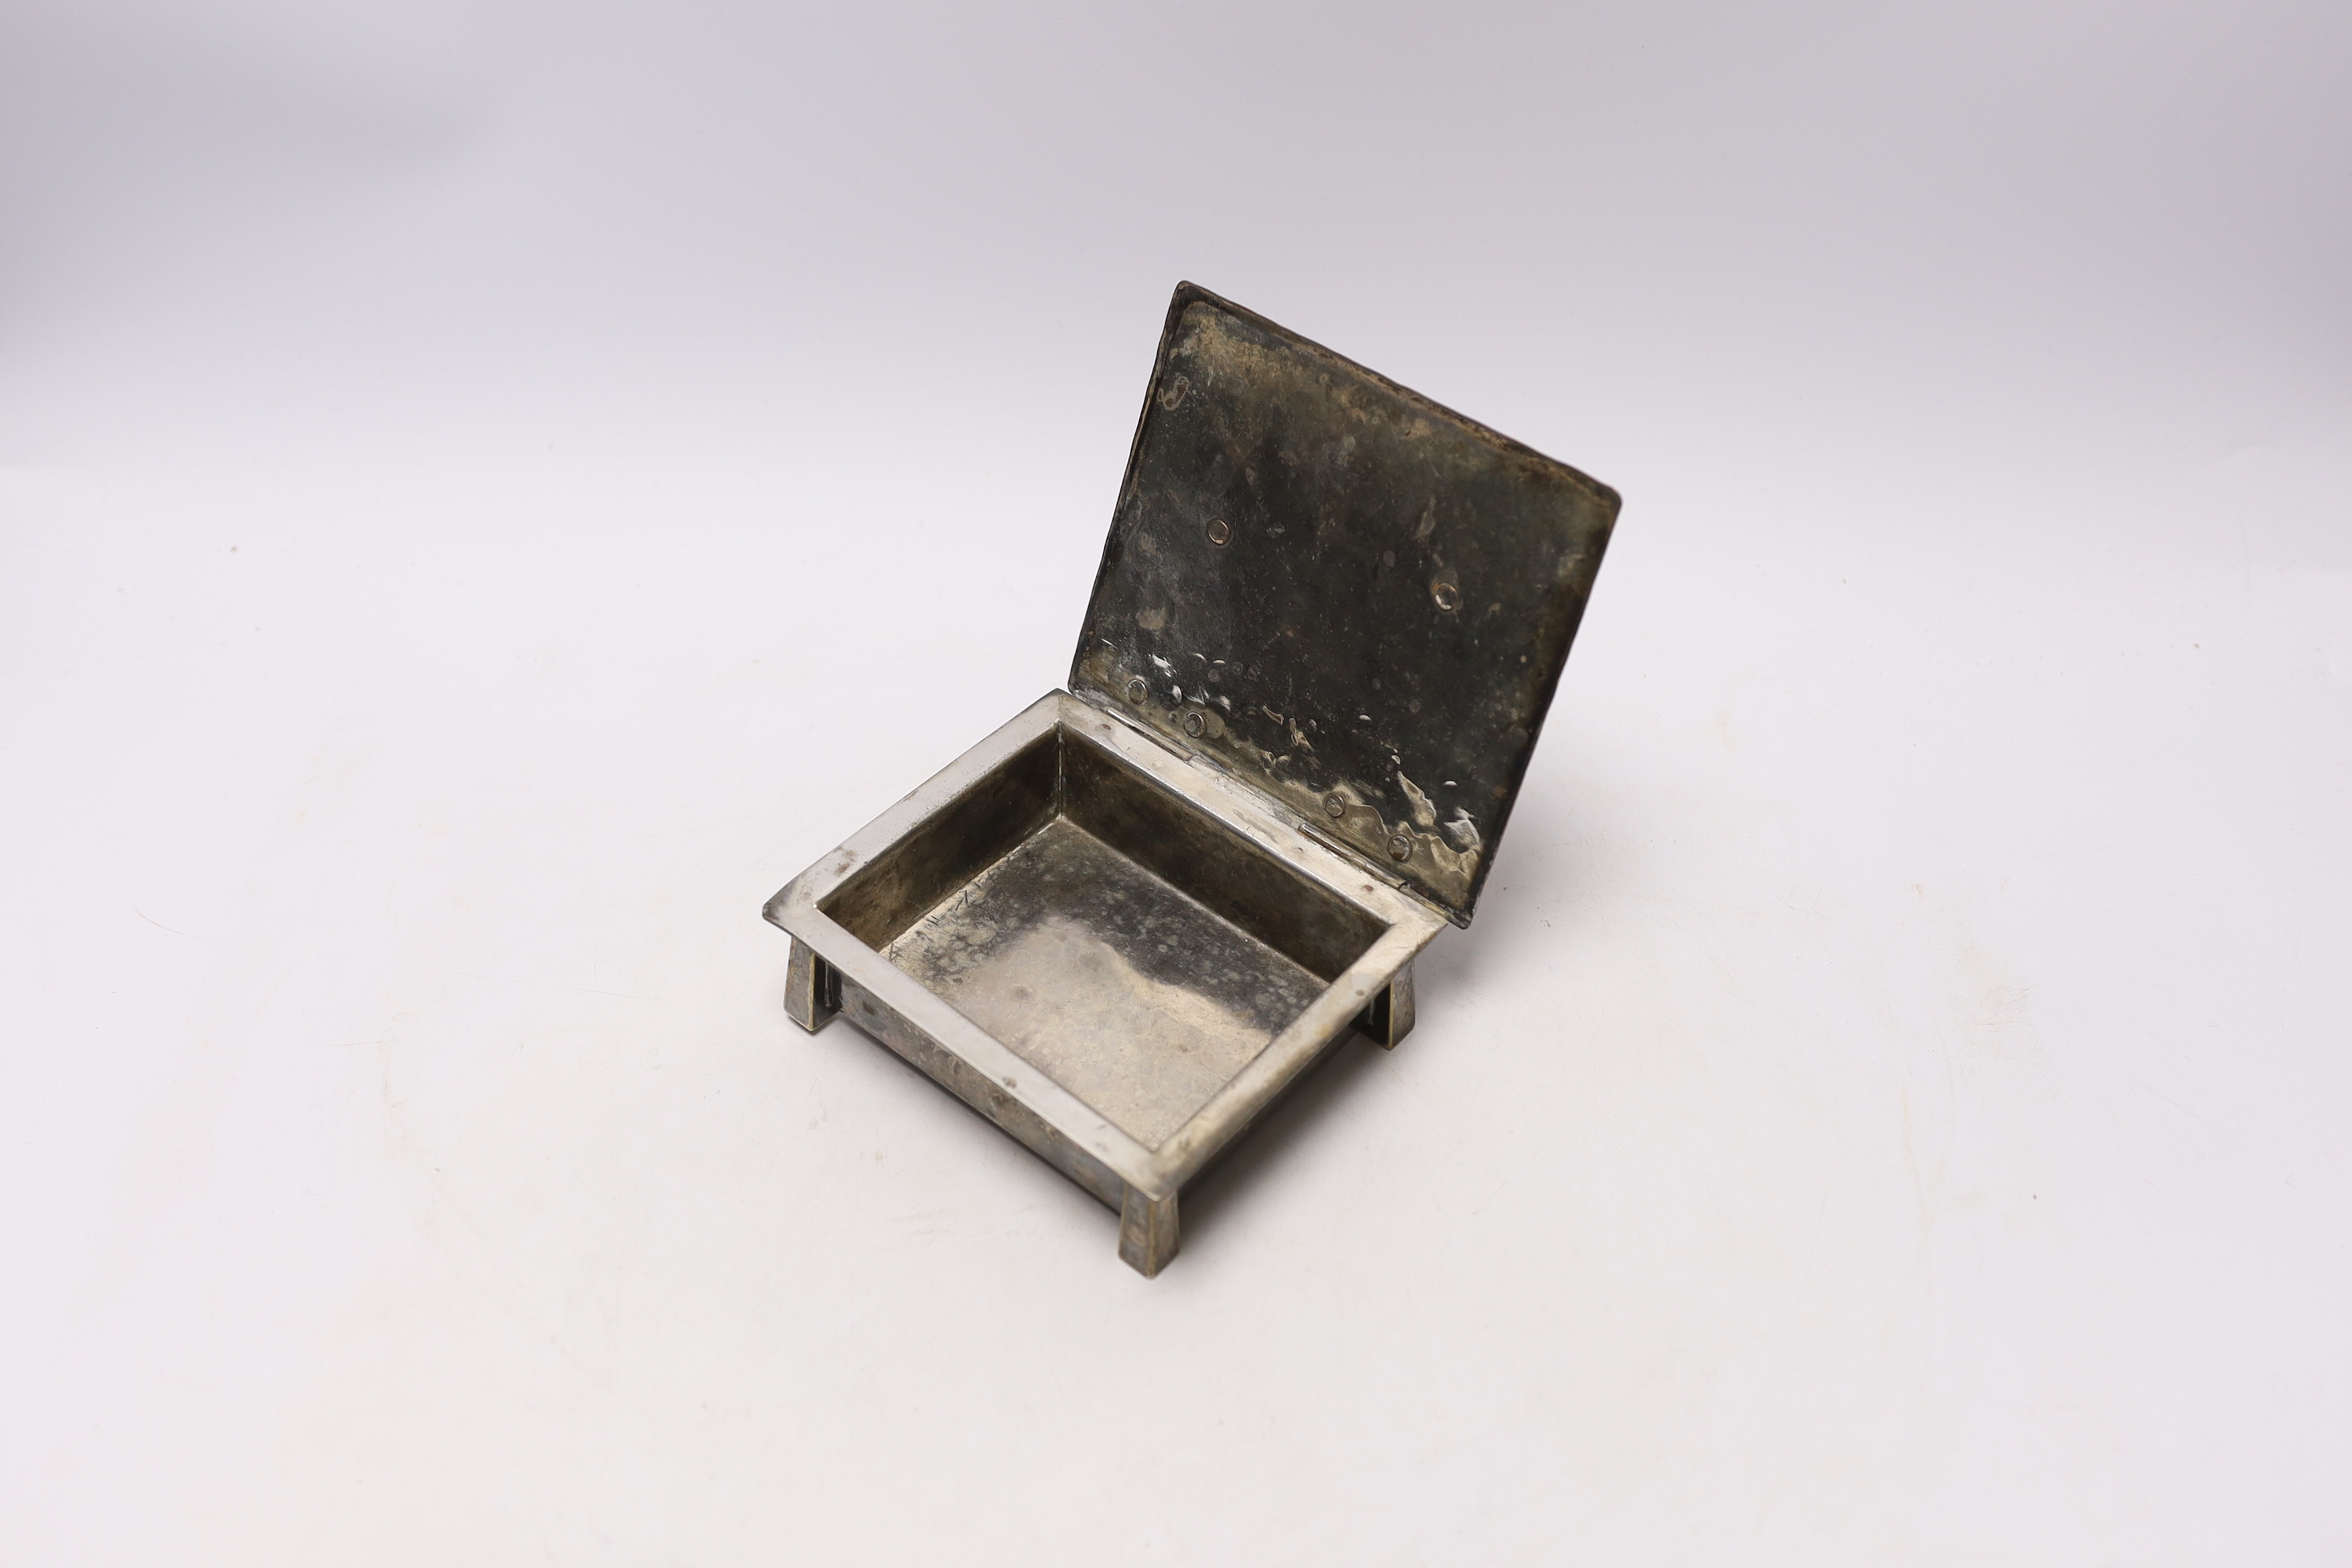 An Arts & Crafts silver plated box, with strap hinges and hammered finish, 13 x 11.5 x 4cm